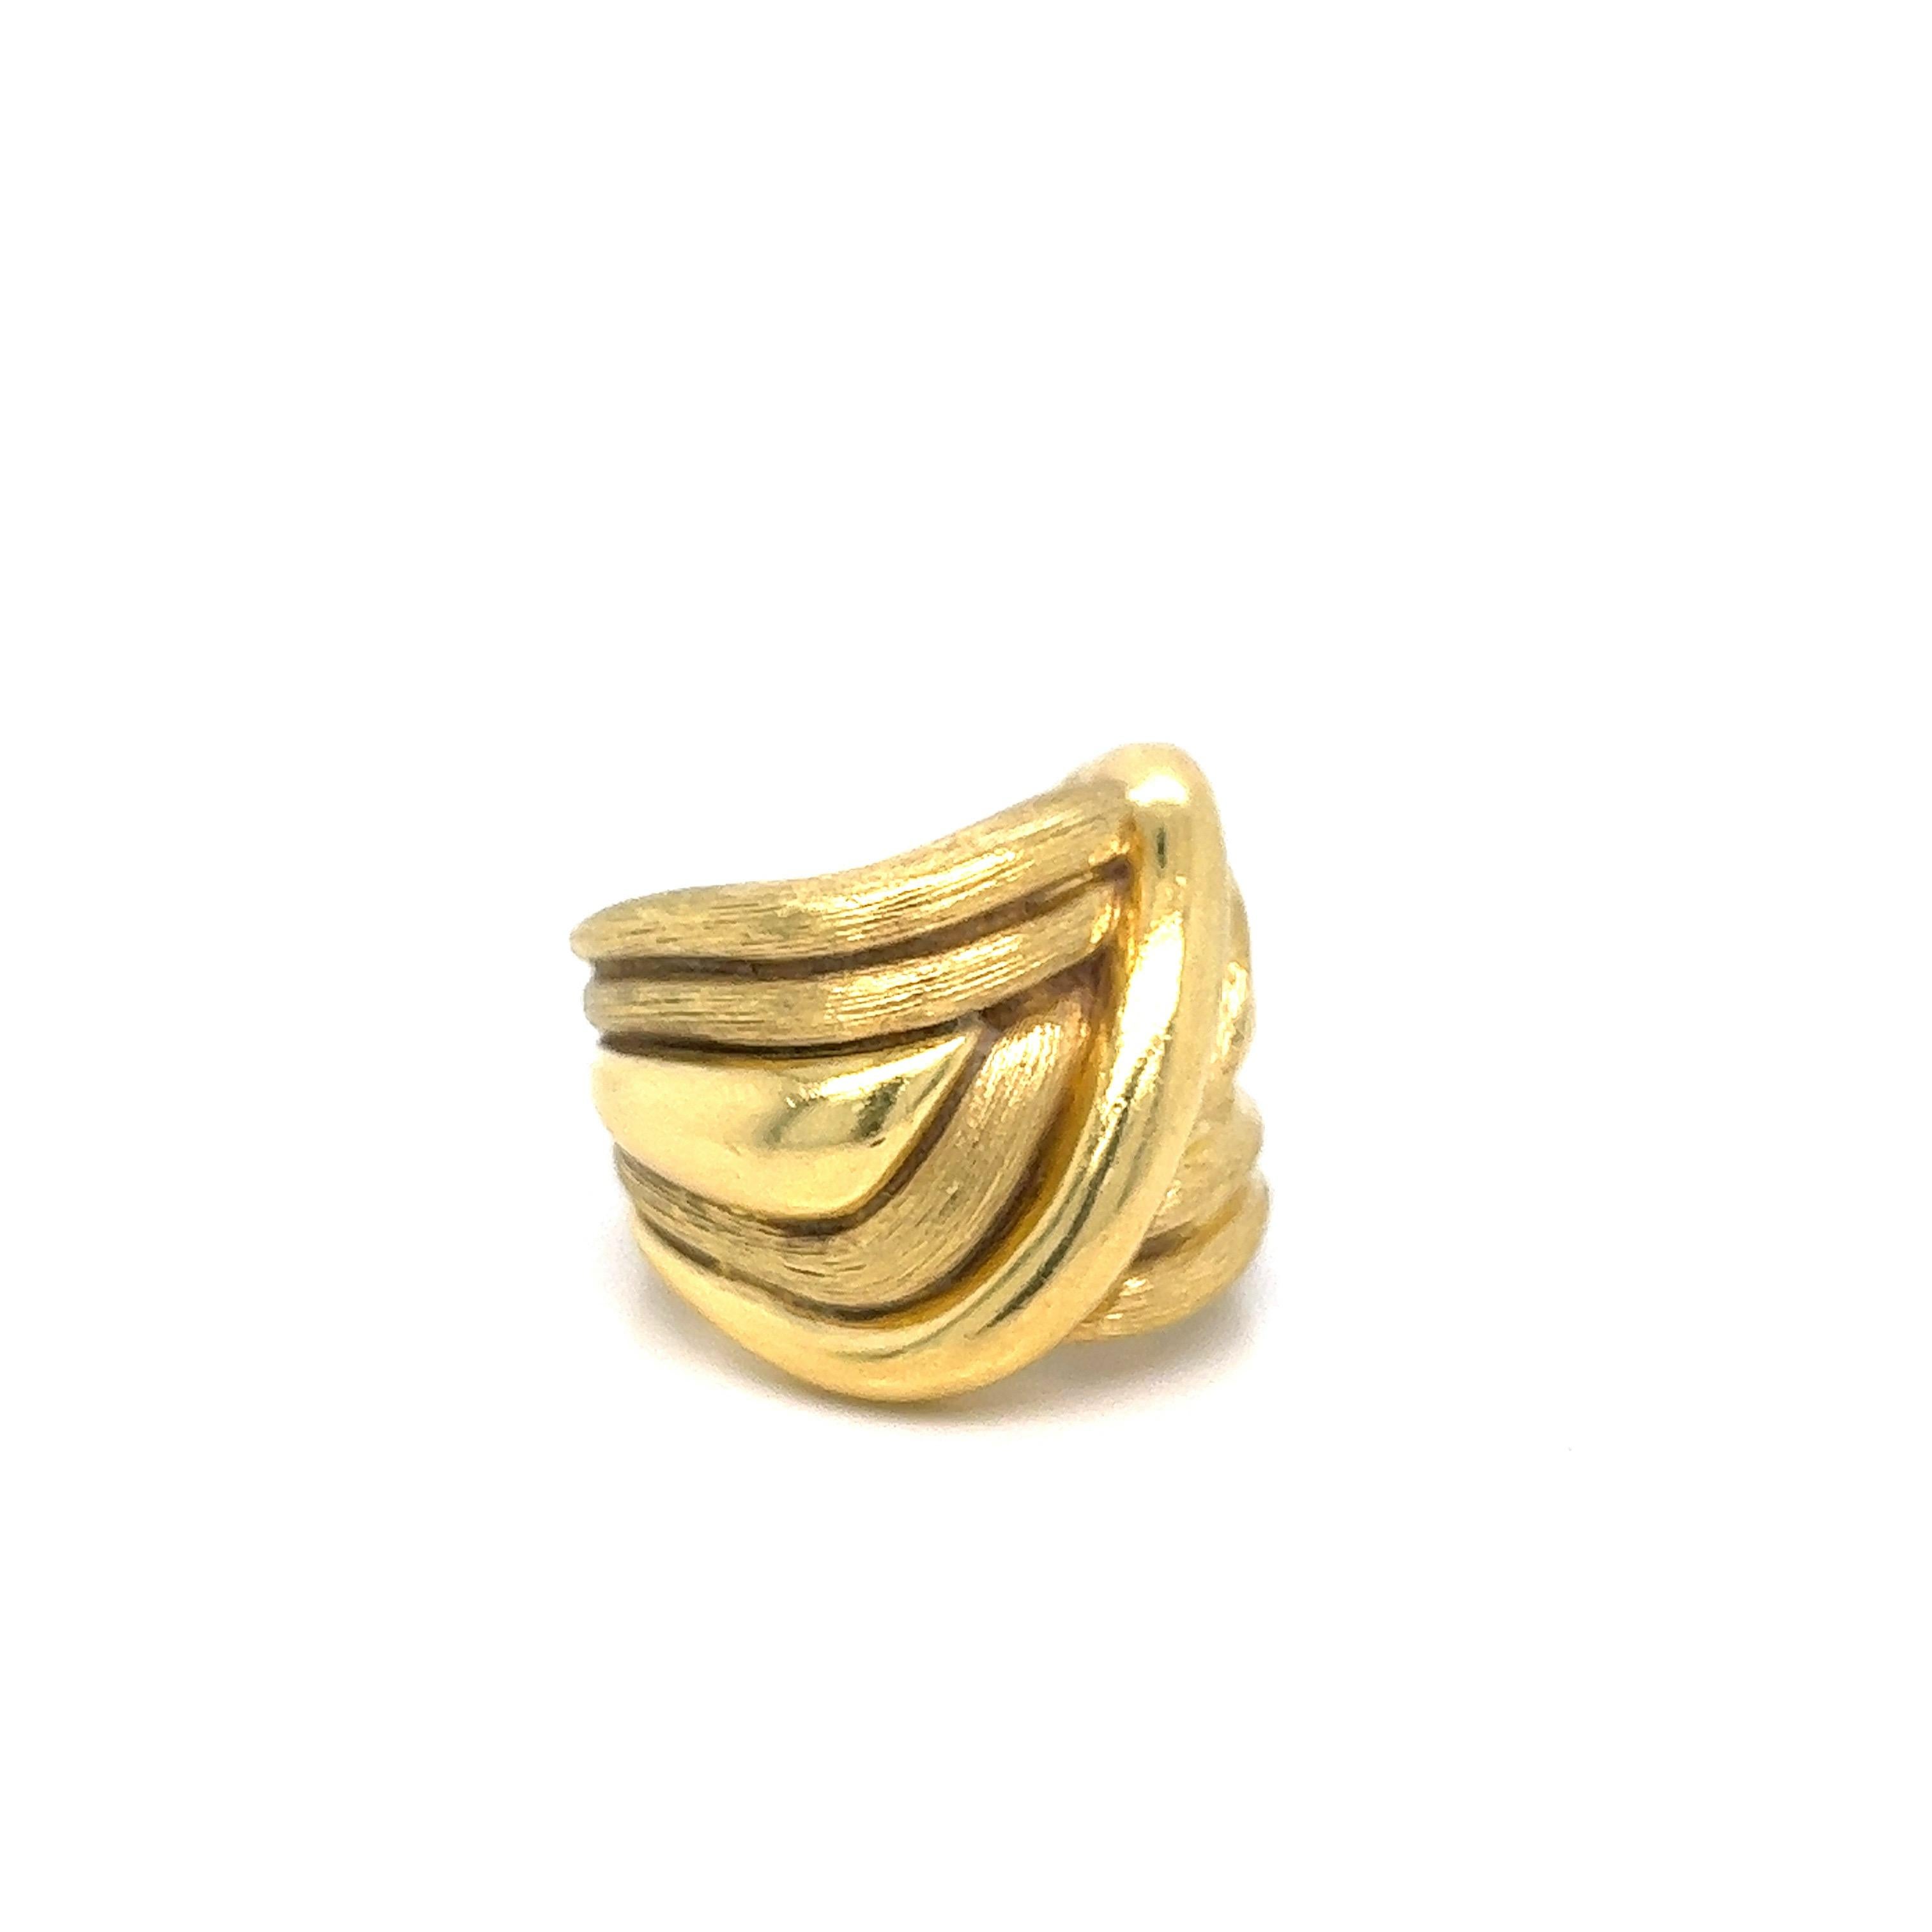 Henry Dunay 18 karat yellow gold ring. Serial no. B1125. Marked: Dunay / 18K / 750 / B1125. Total weight: 24.6 grams. Size 6. Thickest band width: 1.8 cm. 